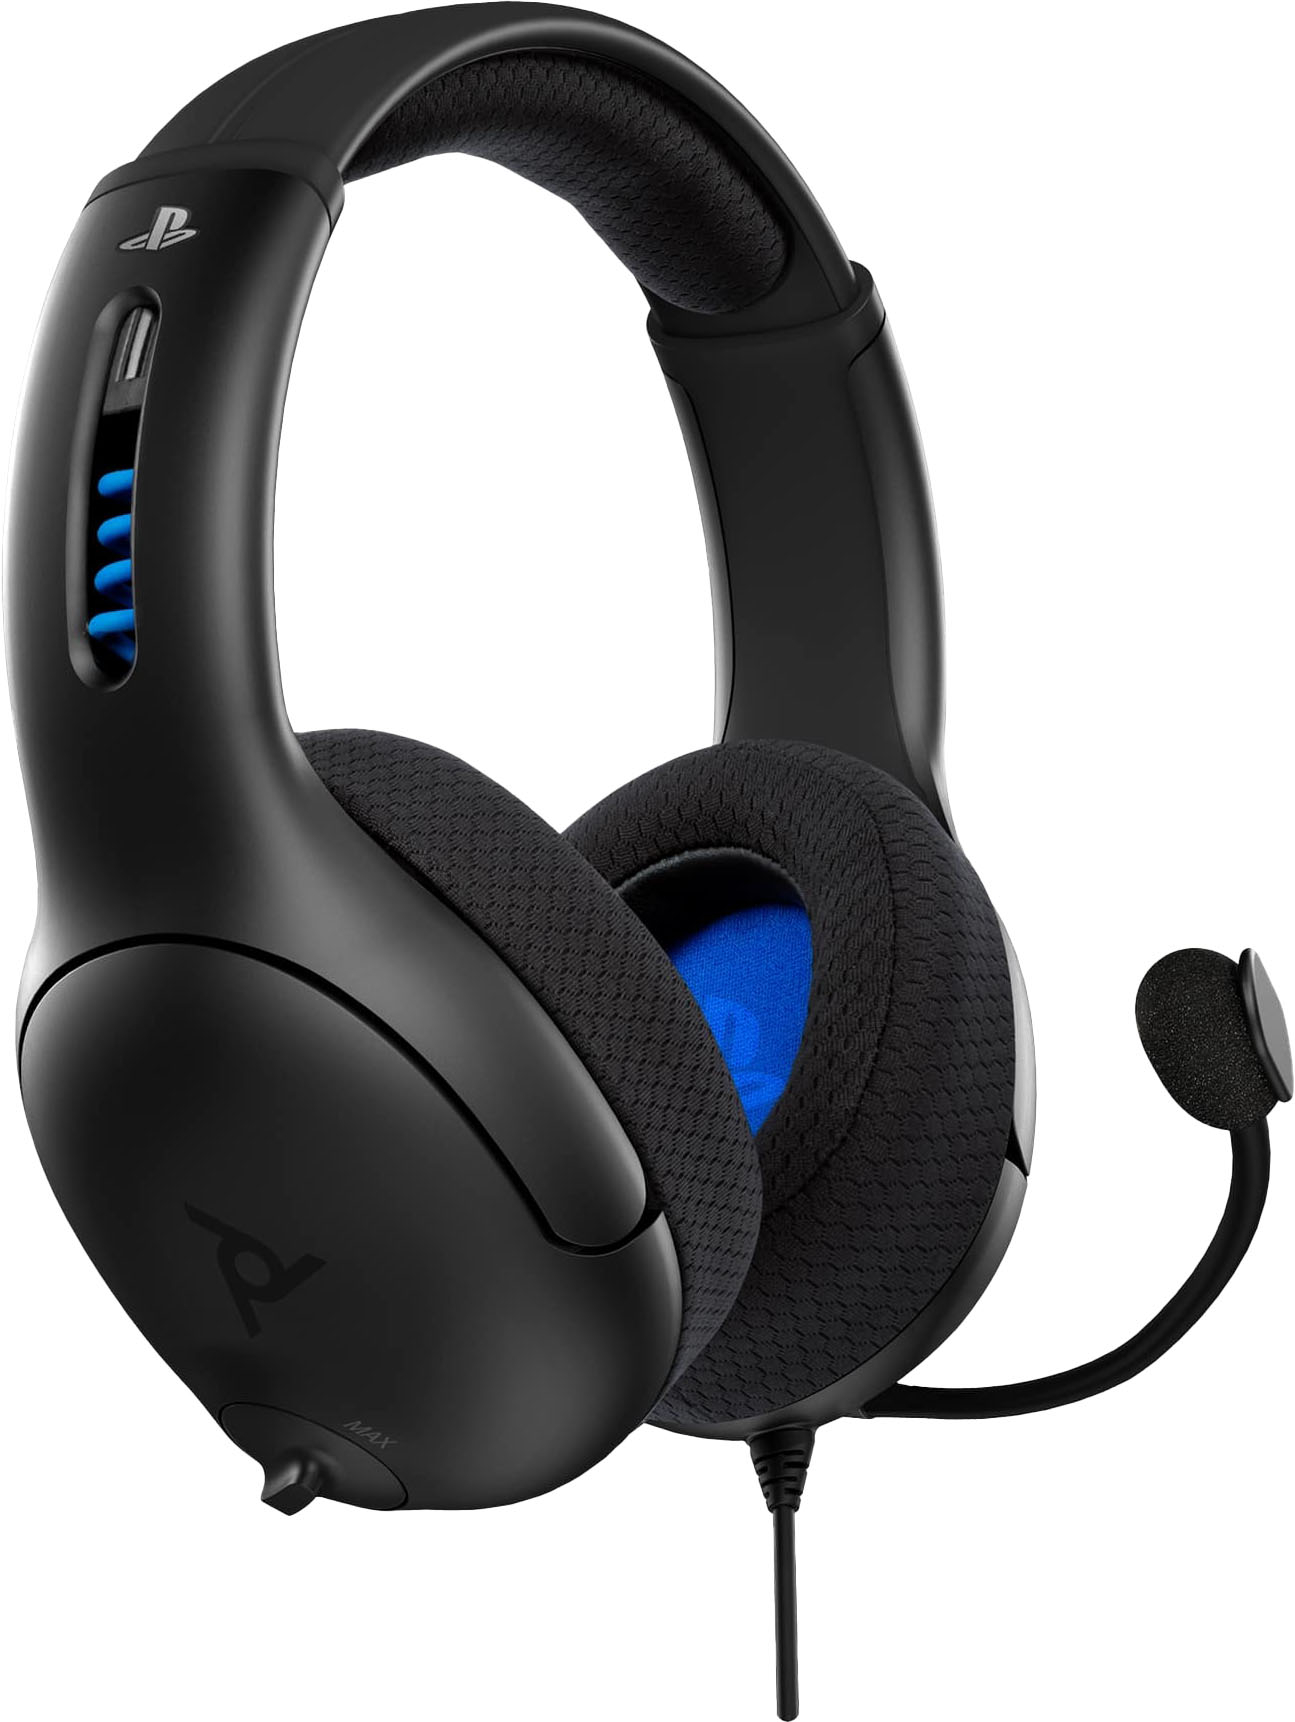 pdp lvl50 wired stereo headset